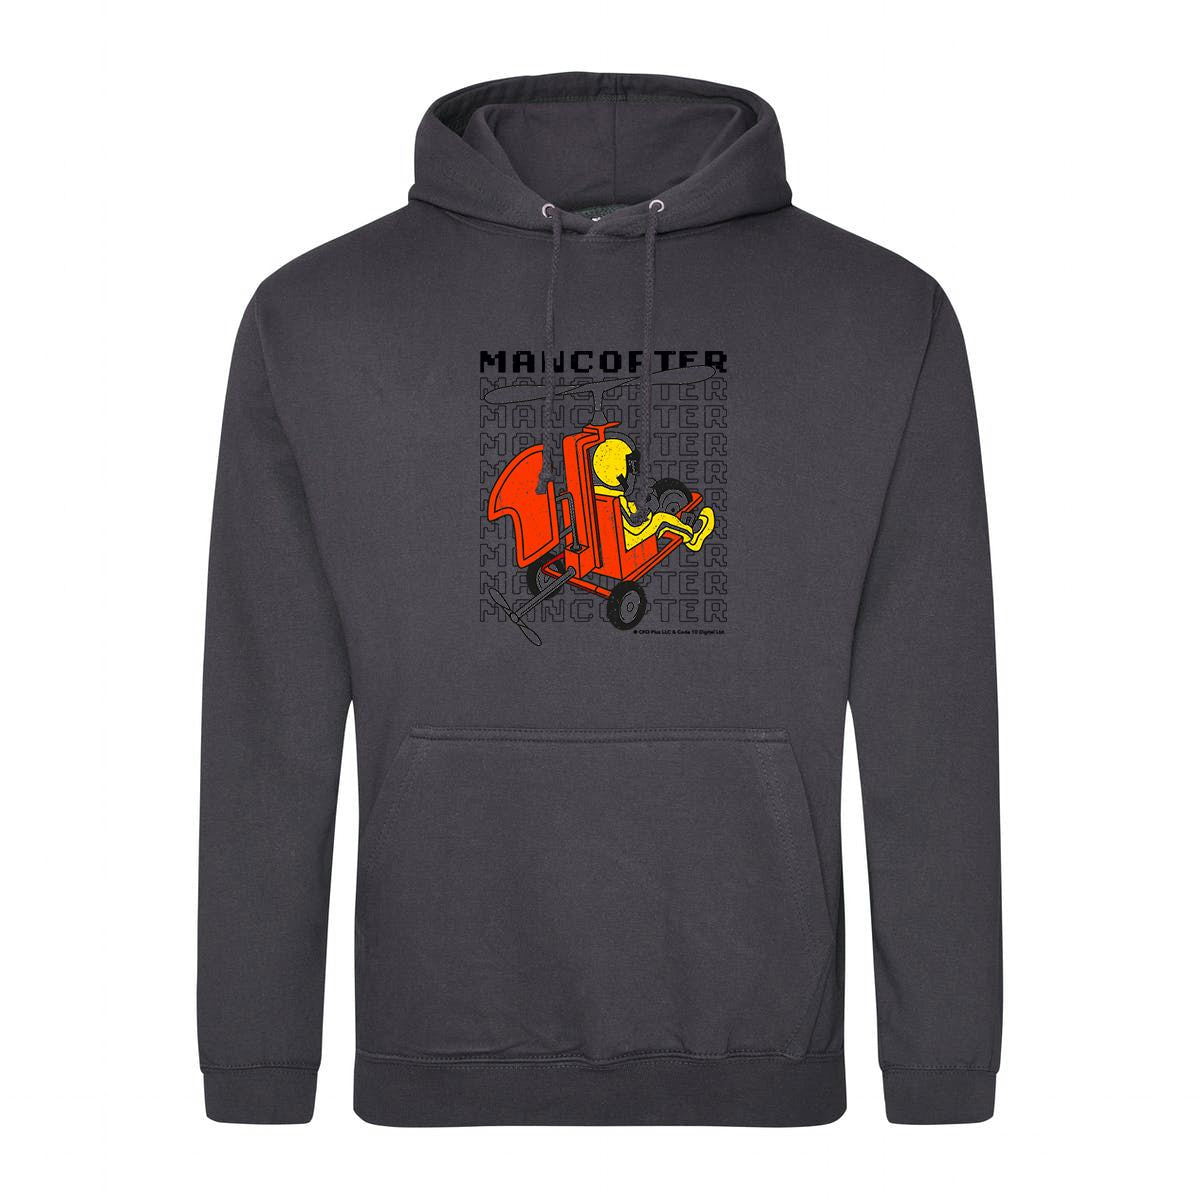 Mancopter Retro Gaming Hoodie Hoodie Seven Squared Small 36" Chest Storm Grey 